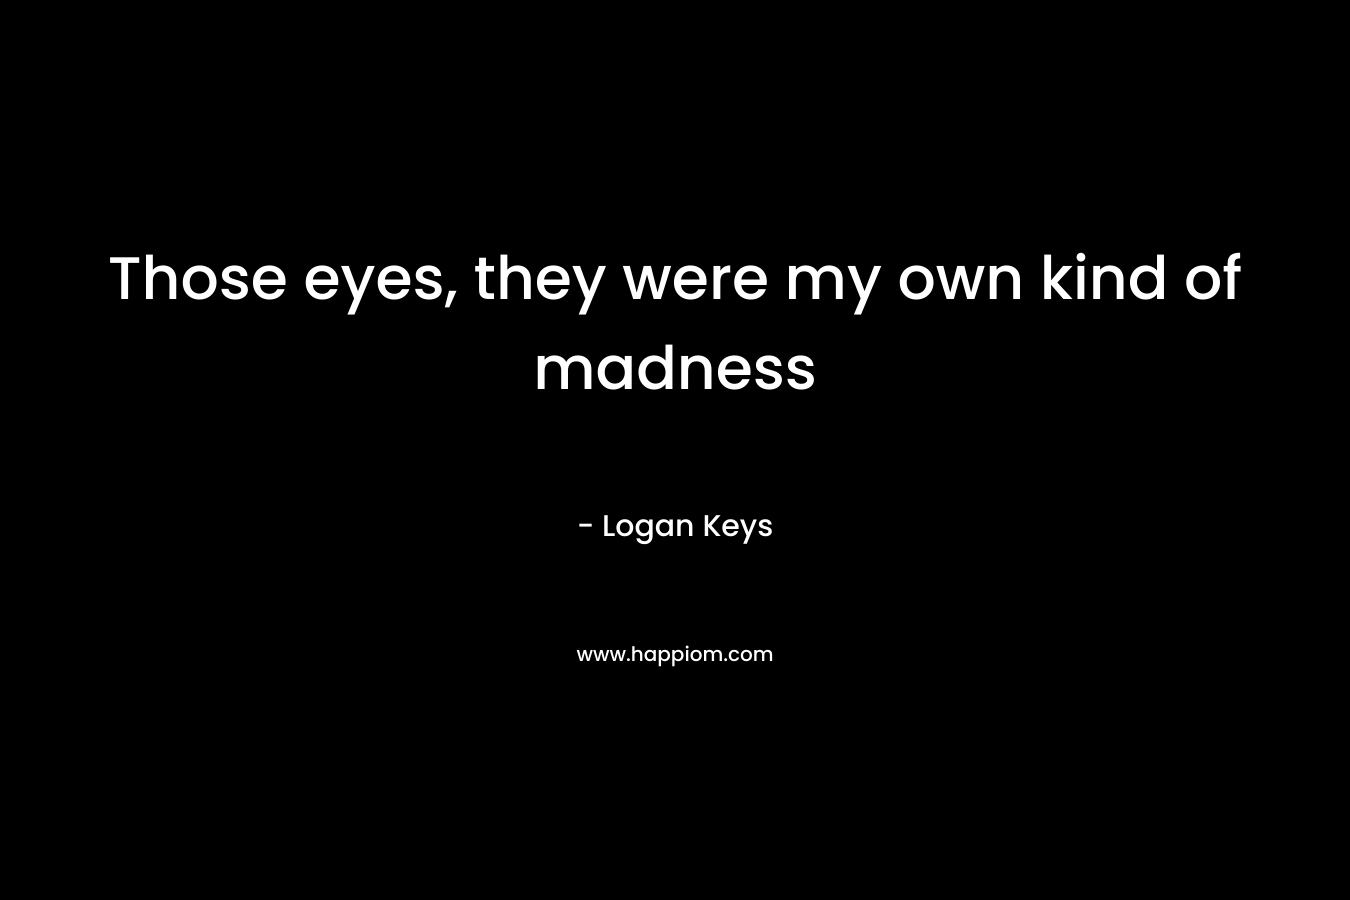 Those eyes, they were my own kind of madness